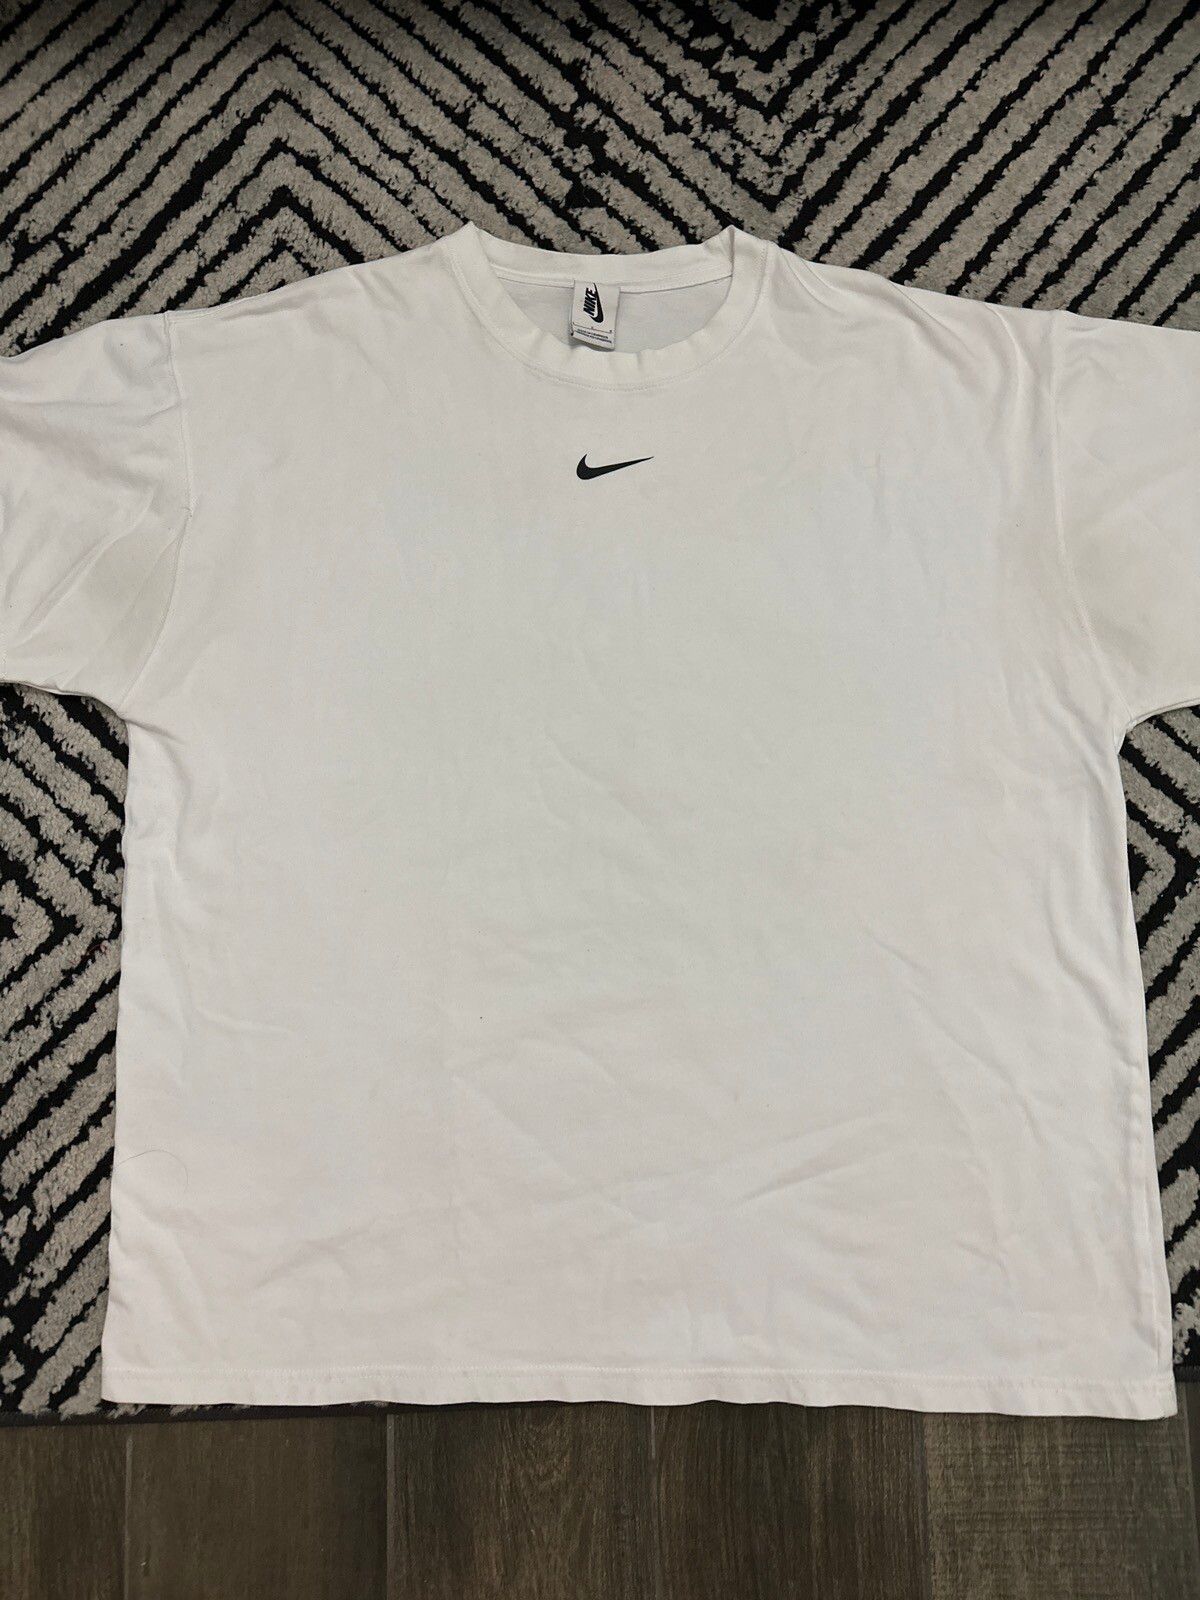 Nike Fear Of God x Nike Air Fear Of God Center Swoosh Tee White Size US L / EU 52-54 / 3 - 2 Preview